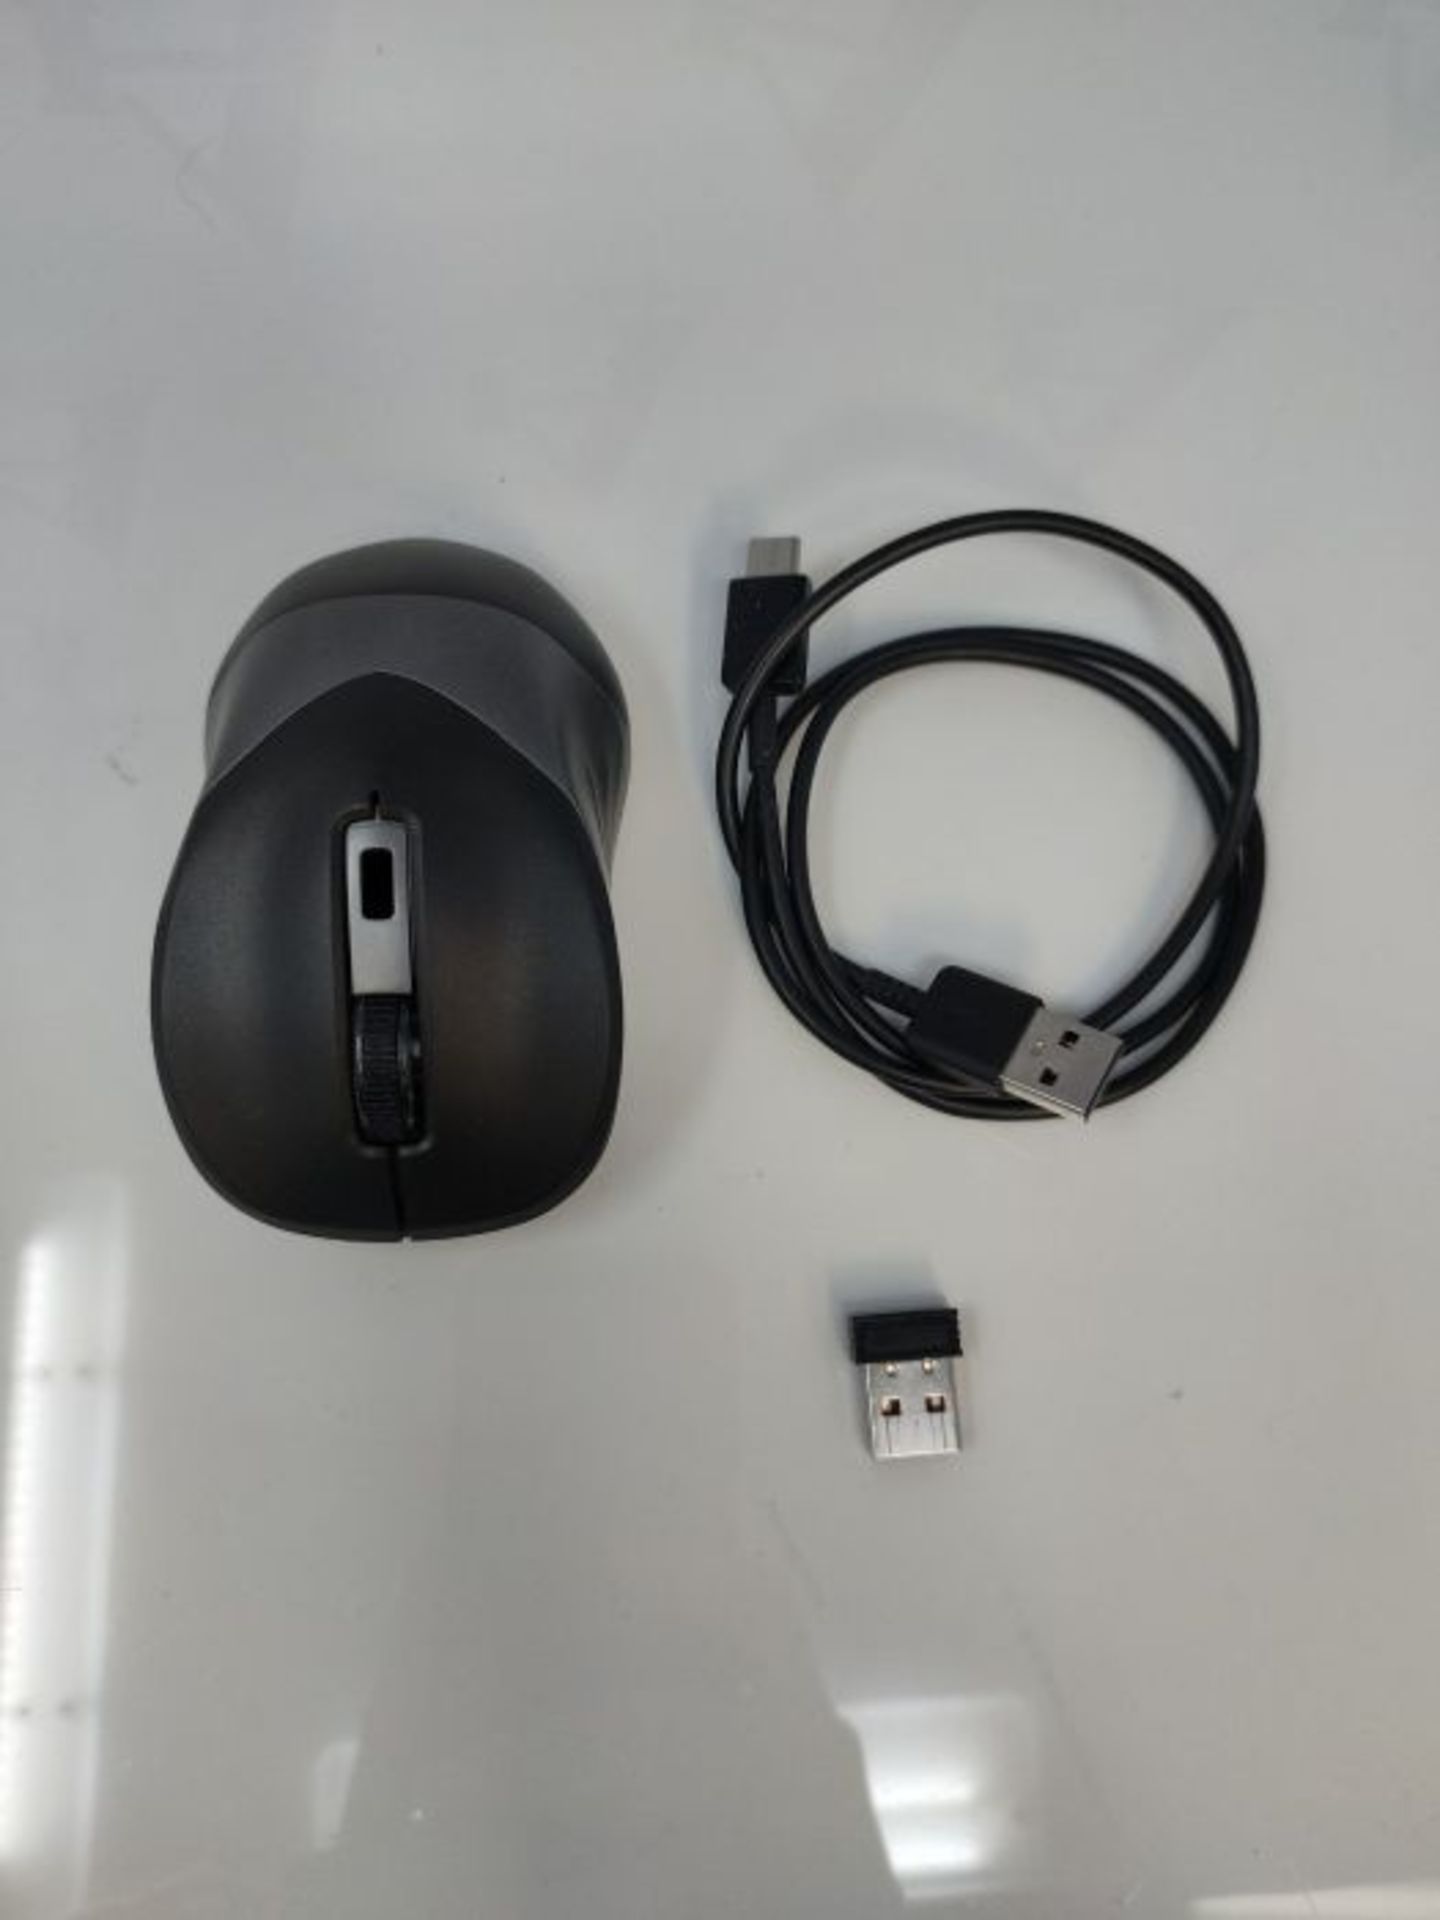 MagoFeliz 2.4G Rechargeable LED Wireless Mouse, Jiggler Mode, Wireless Mouse Jiggler/M - Image 3 of 3